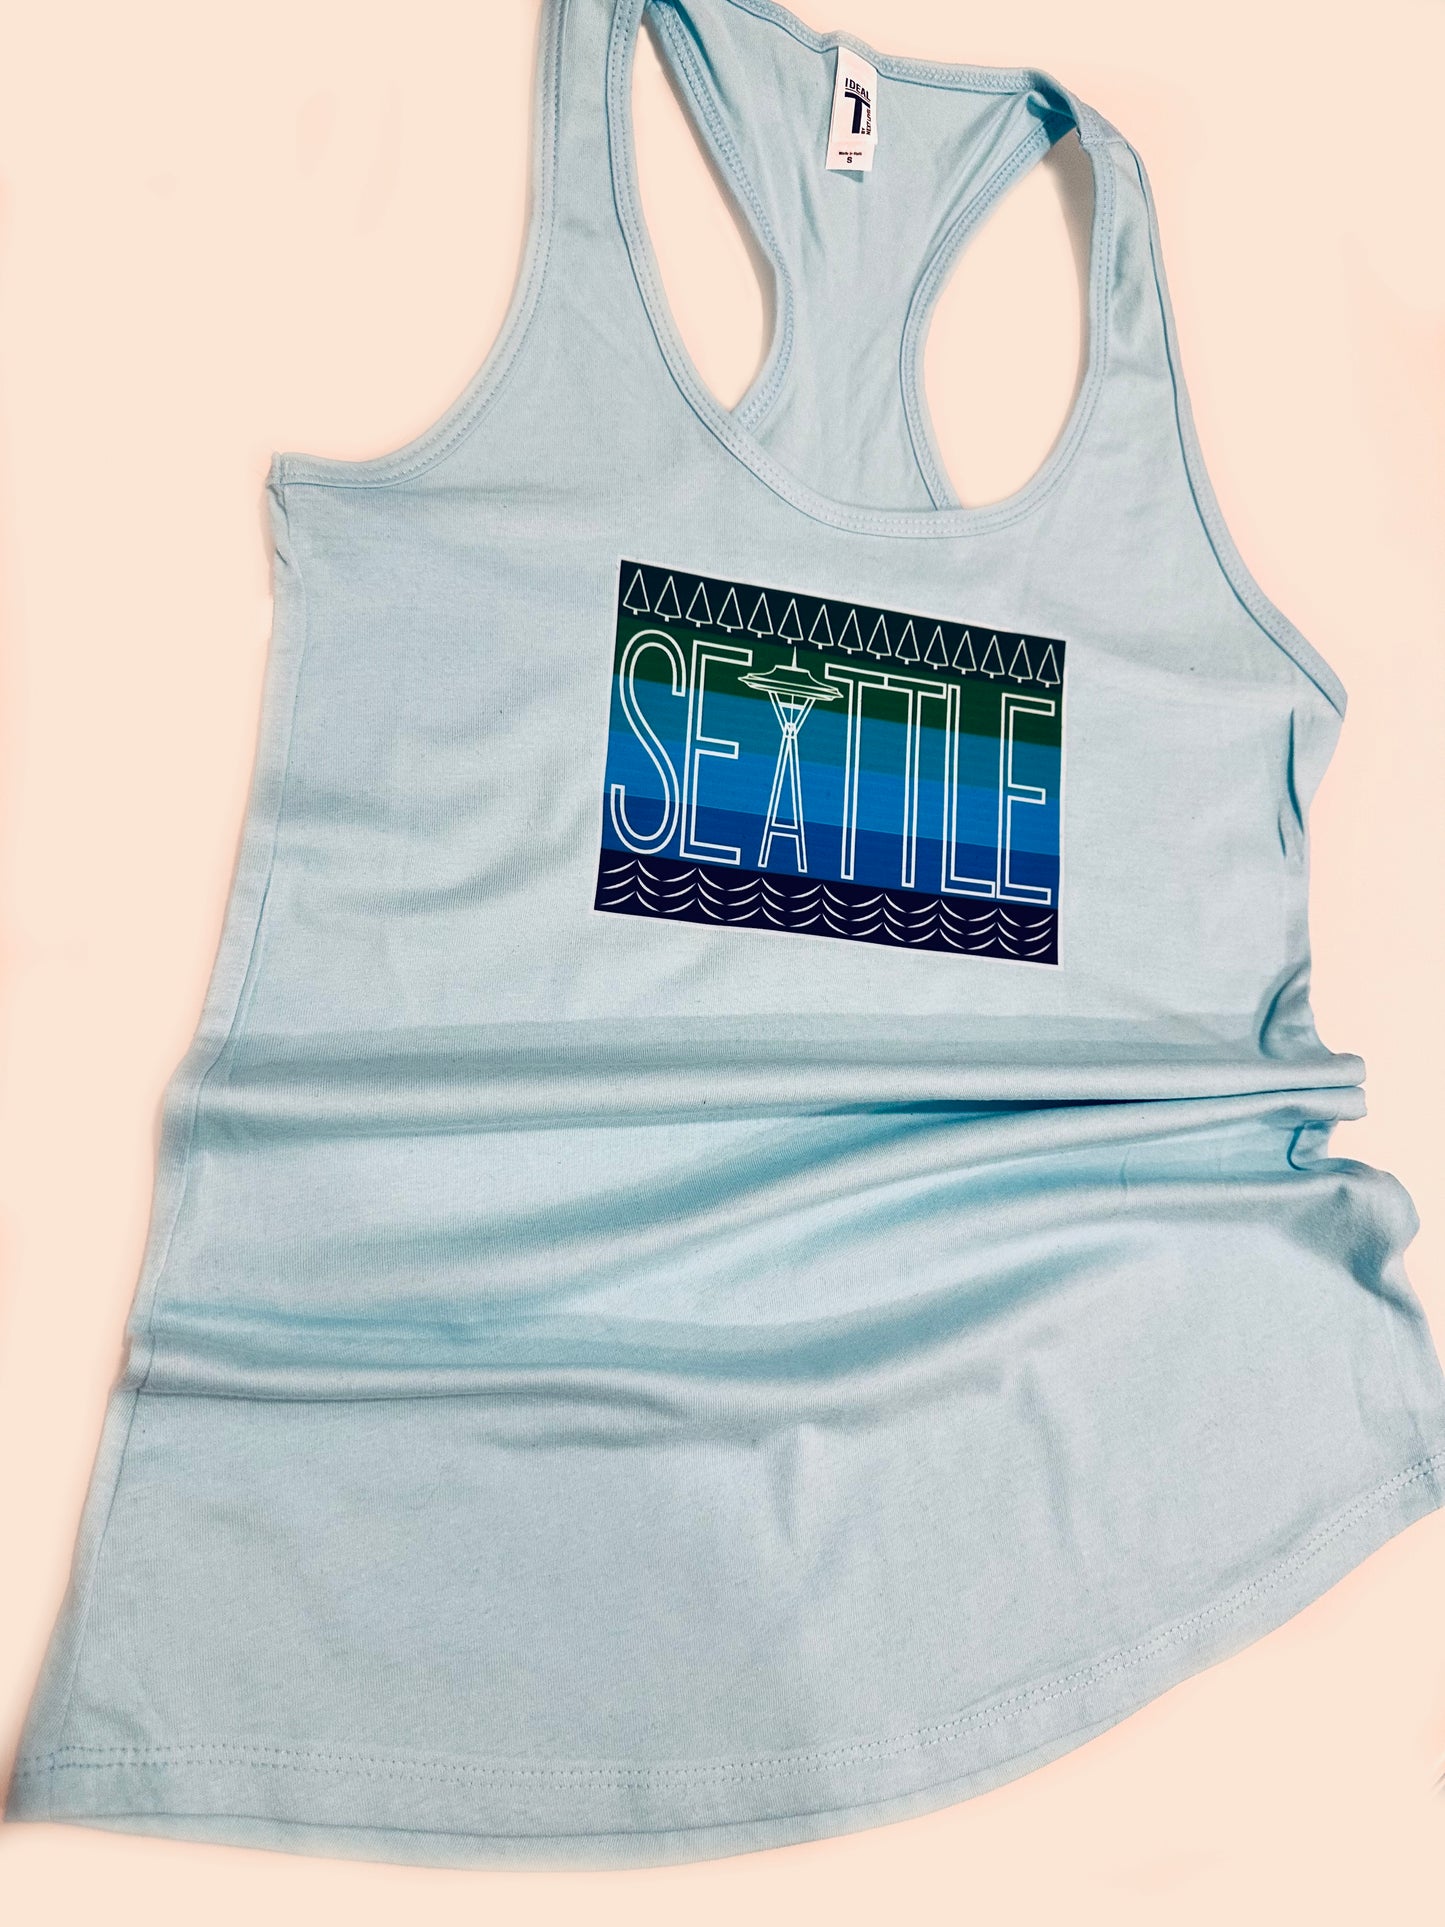 Blue SEATTLE Space needle Women's Cotton poly blend Graphic Tank Top